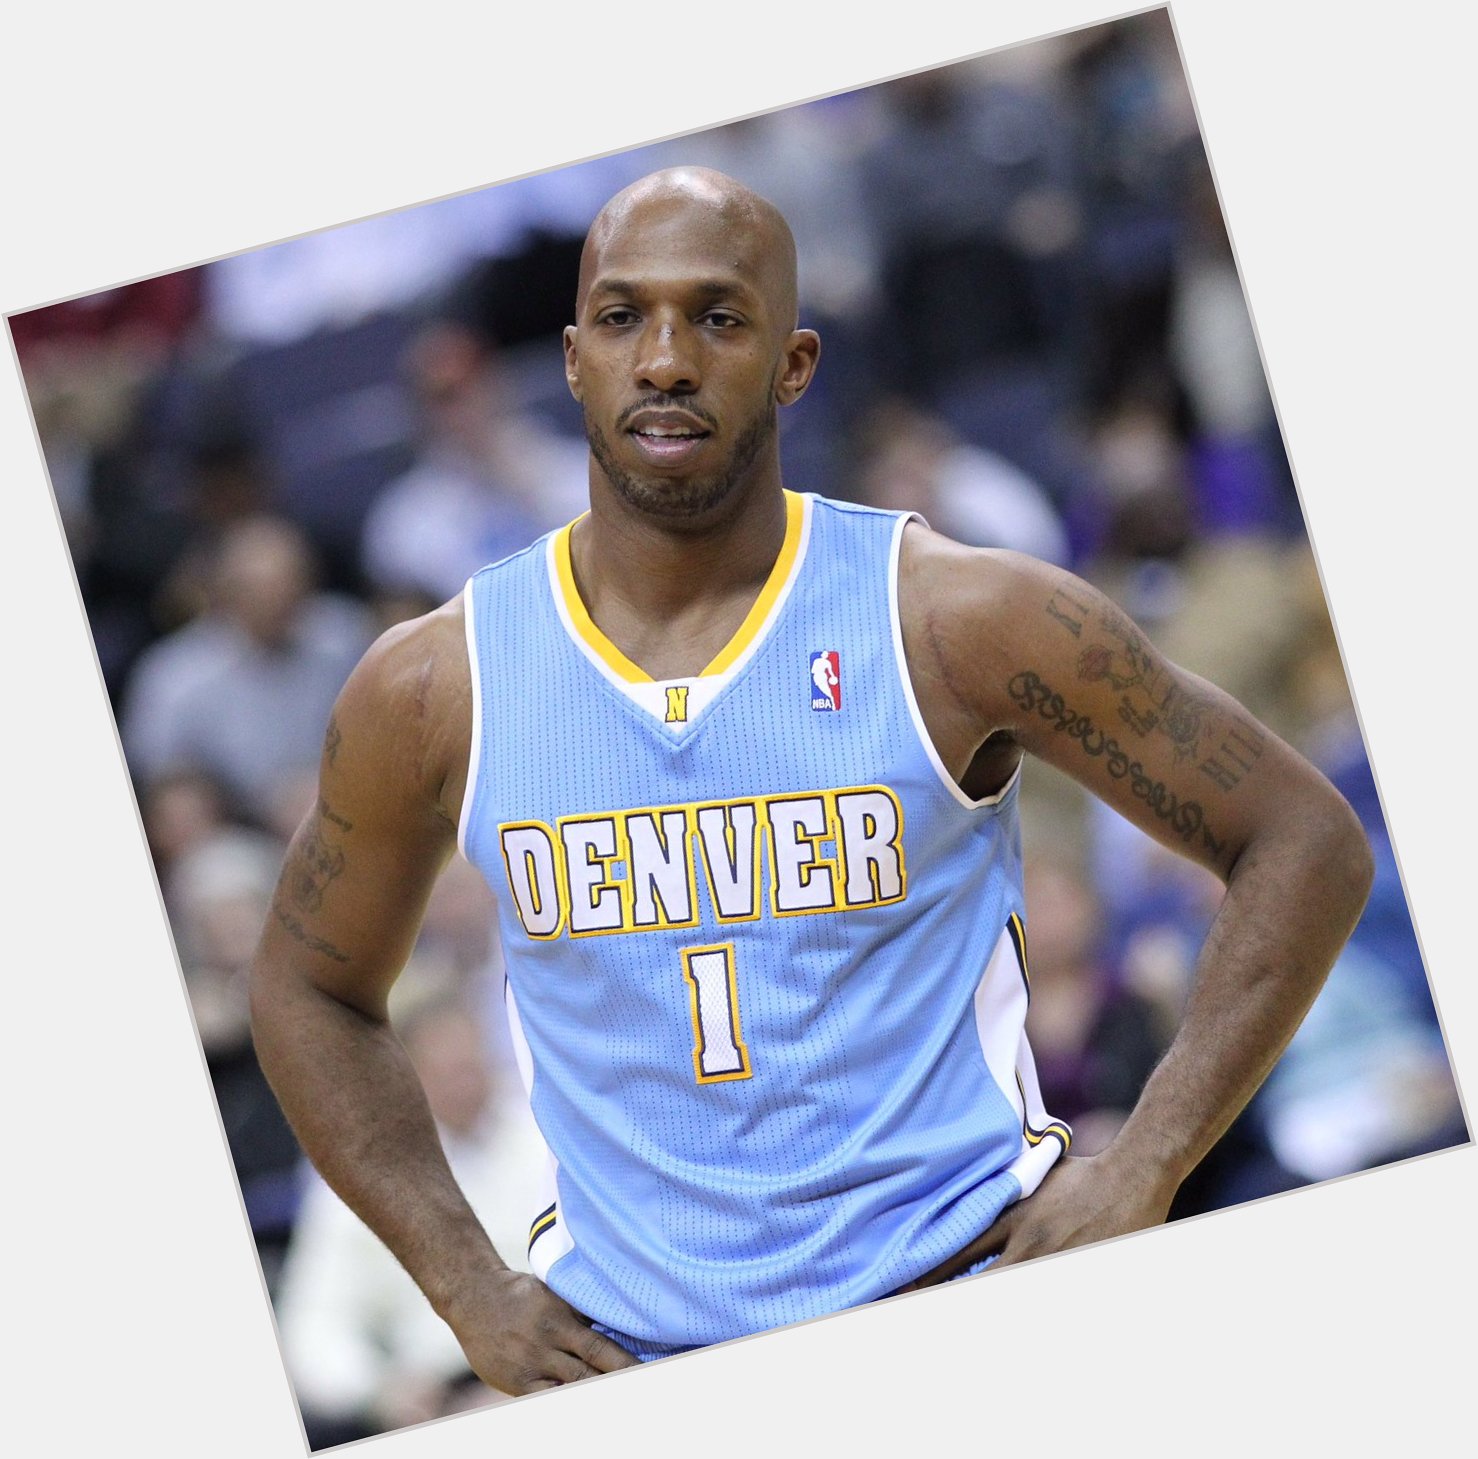 Wishing a Happy Birthday to Chauncey Billups! Have a great day 